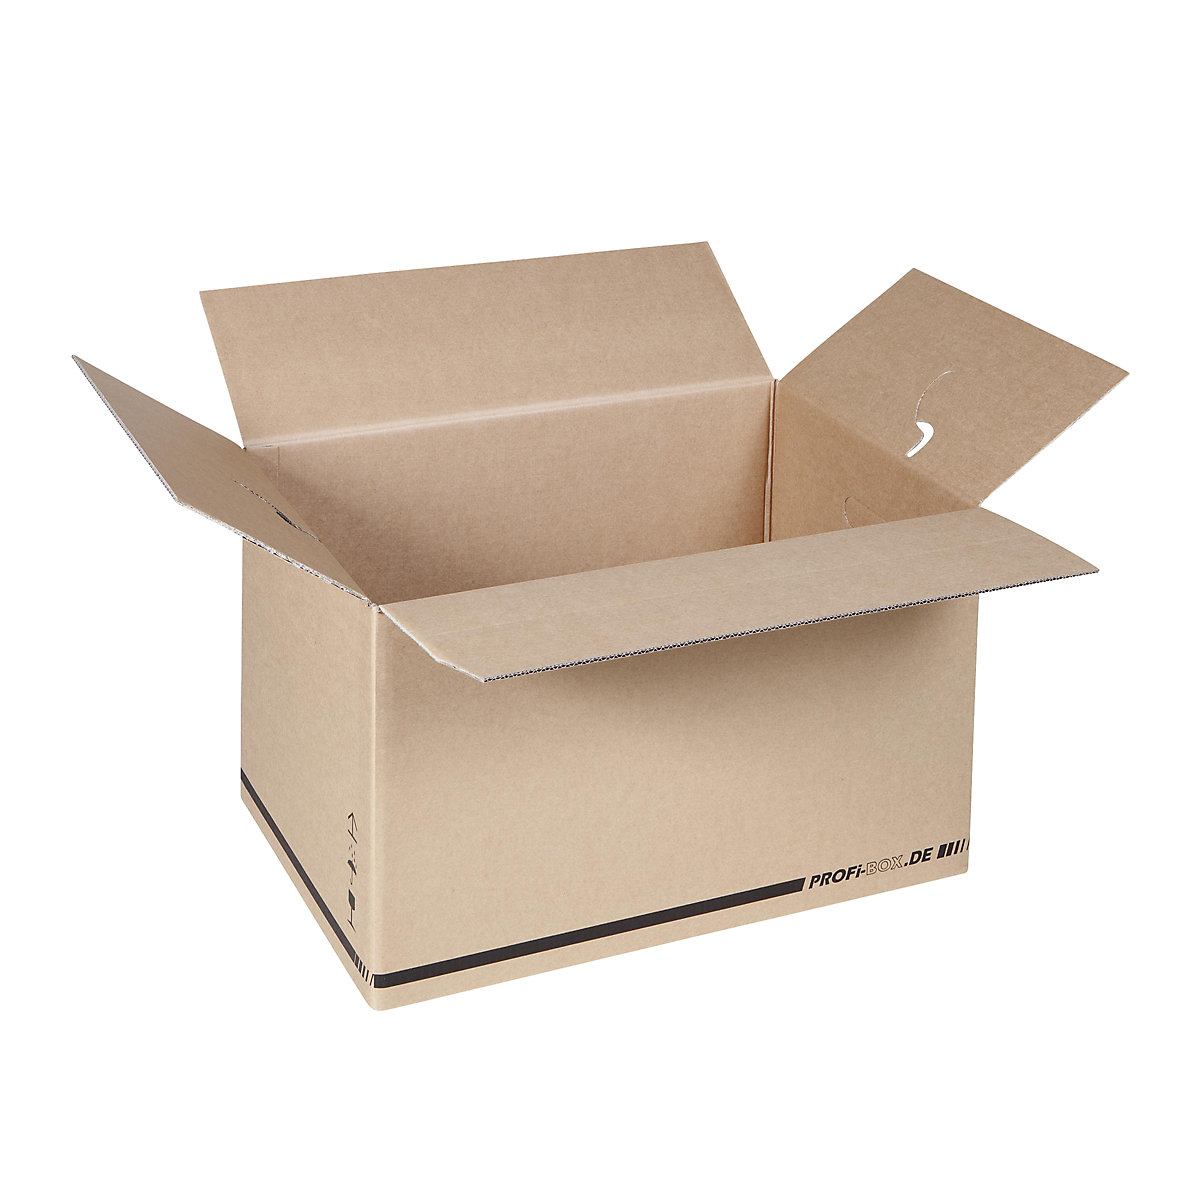 Professional boxes, made of double fluted cardboard, internal dimensions 574 x 376 x 340 mm, FEFCO 0216, pack of 50-10